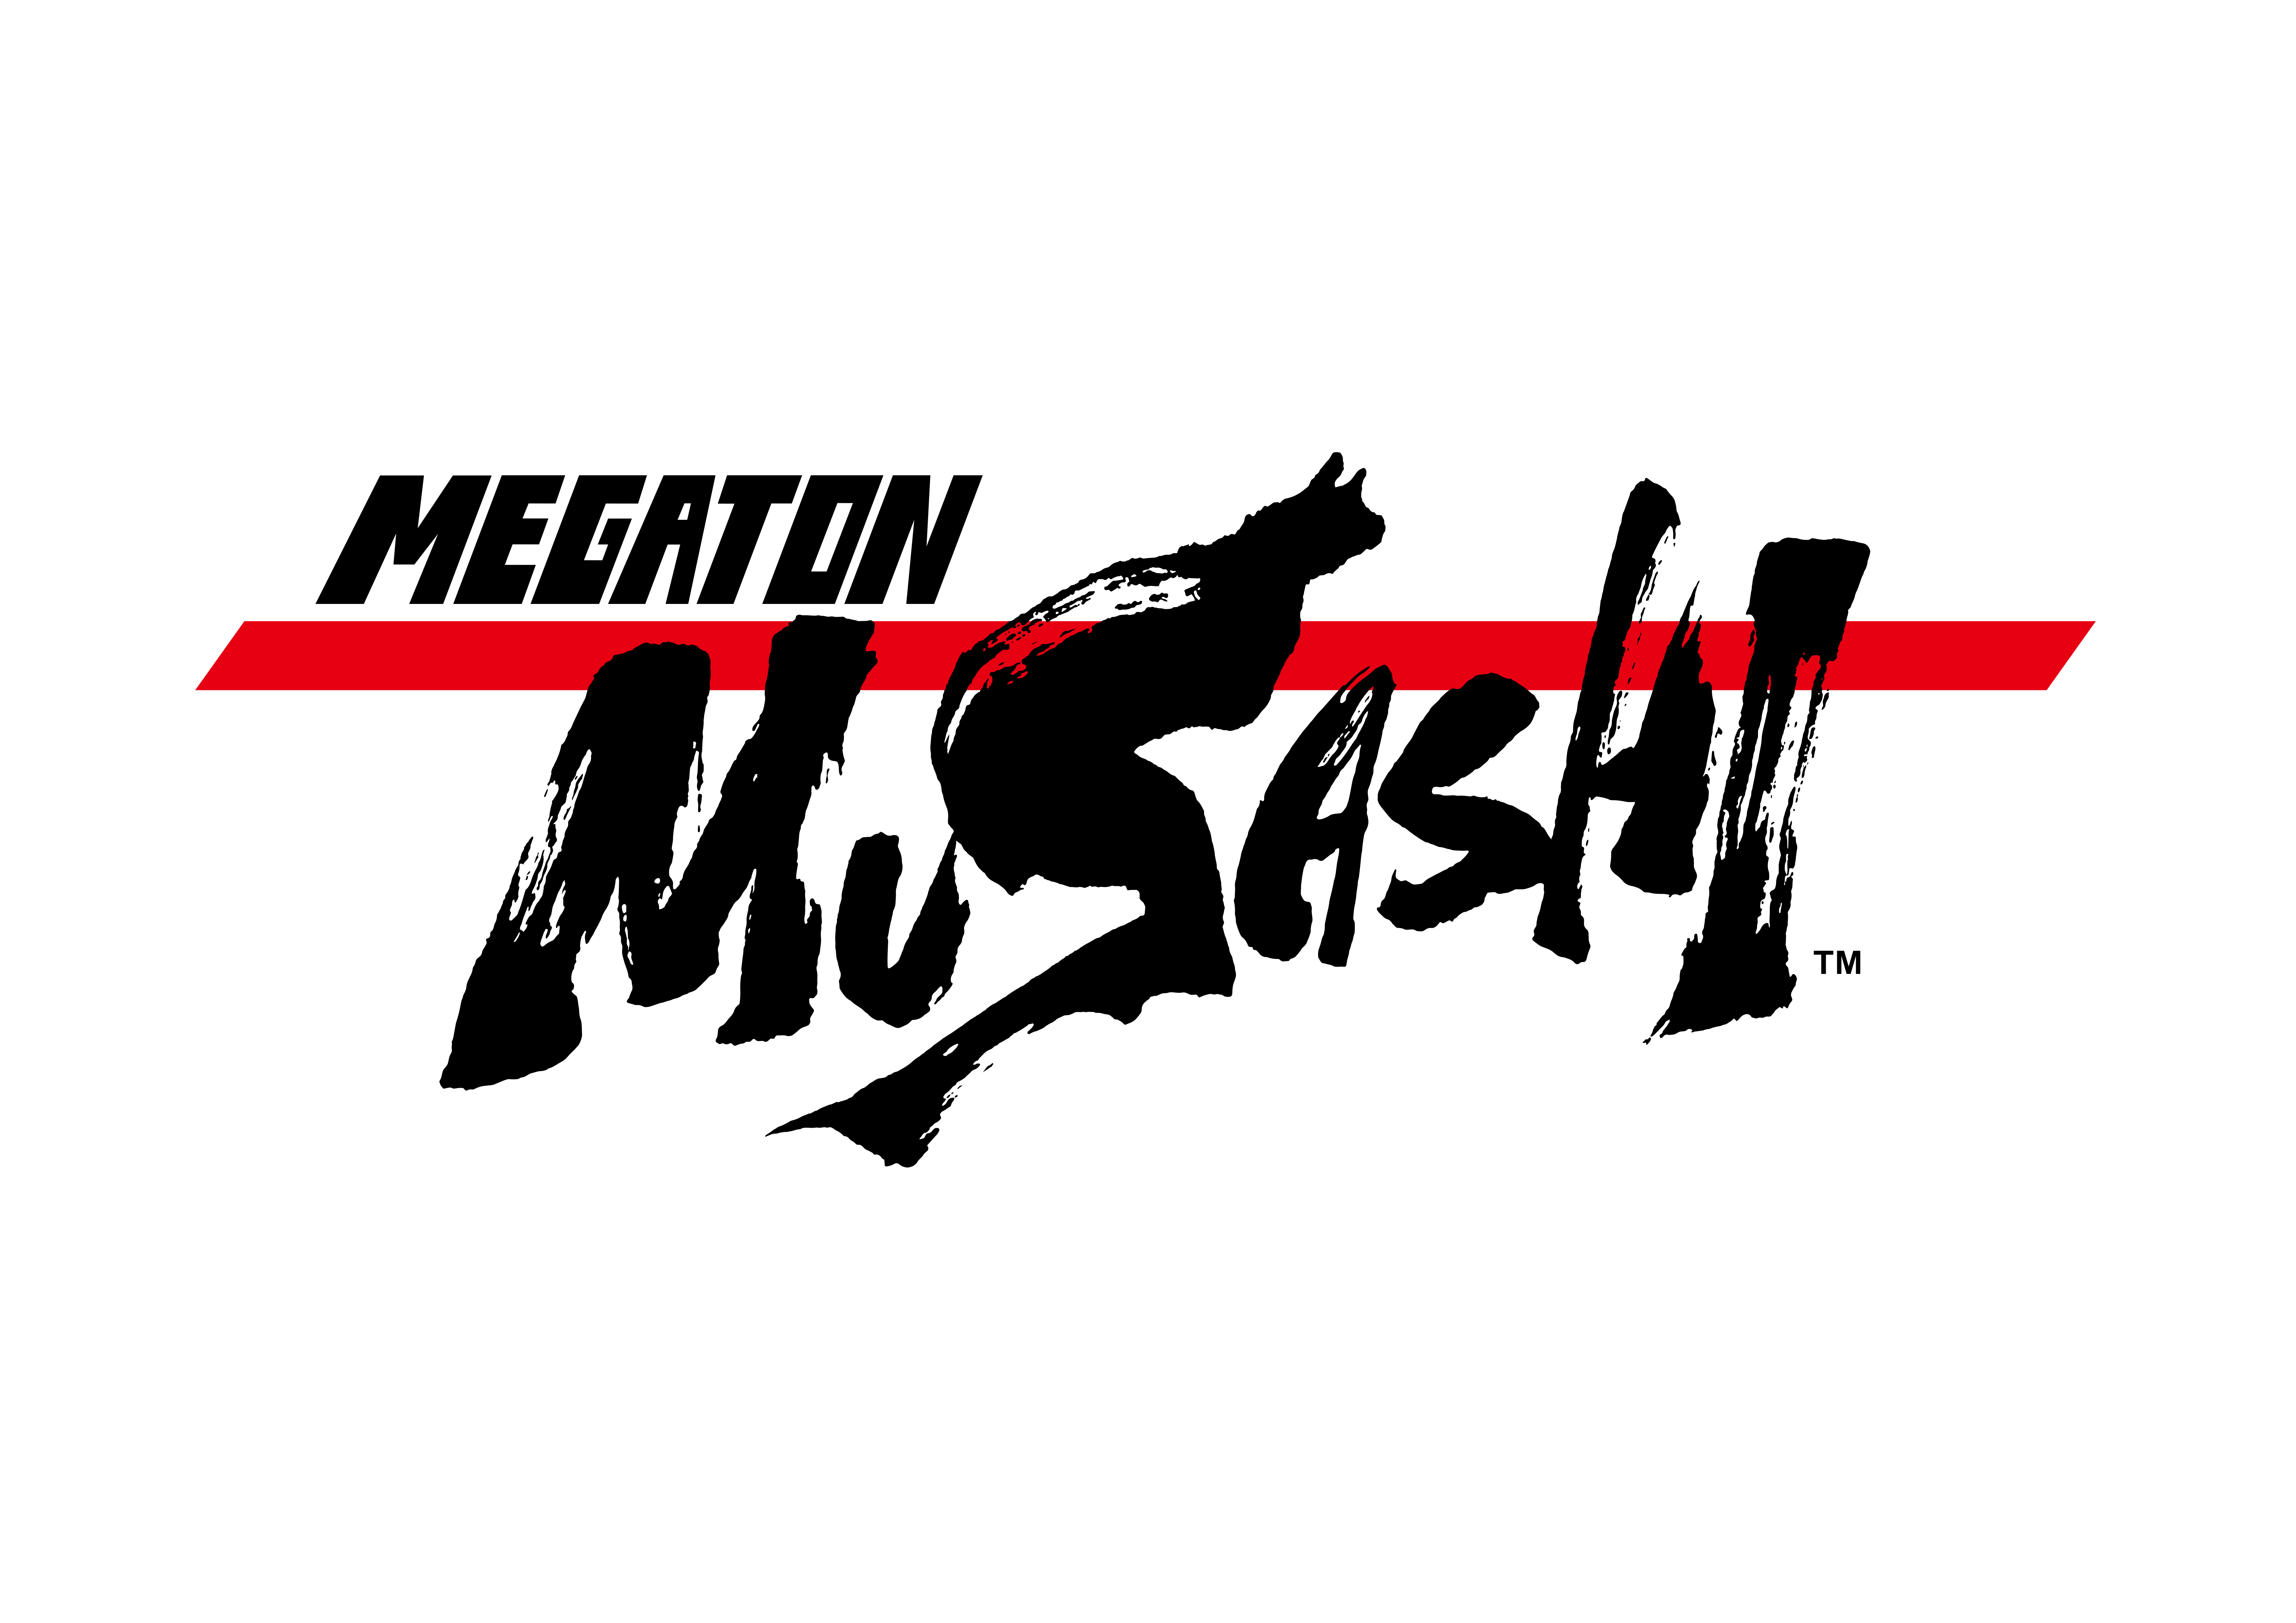 LEVEL5 Inc. Announces a 50% Off Sale for MEGATON MUSASHI W: WIRED on PlayStation